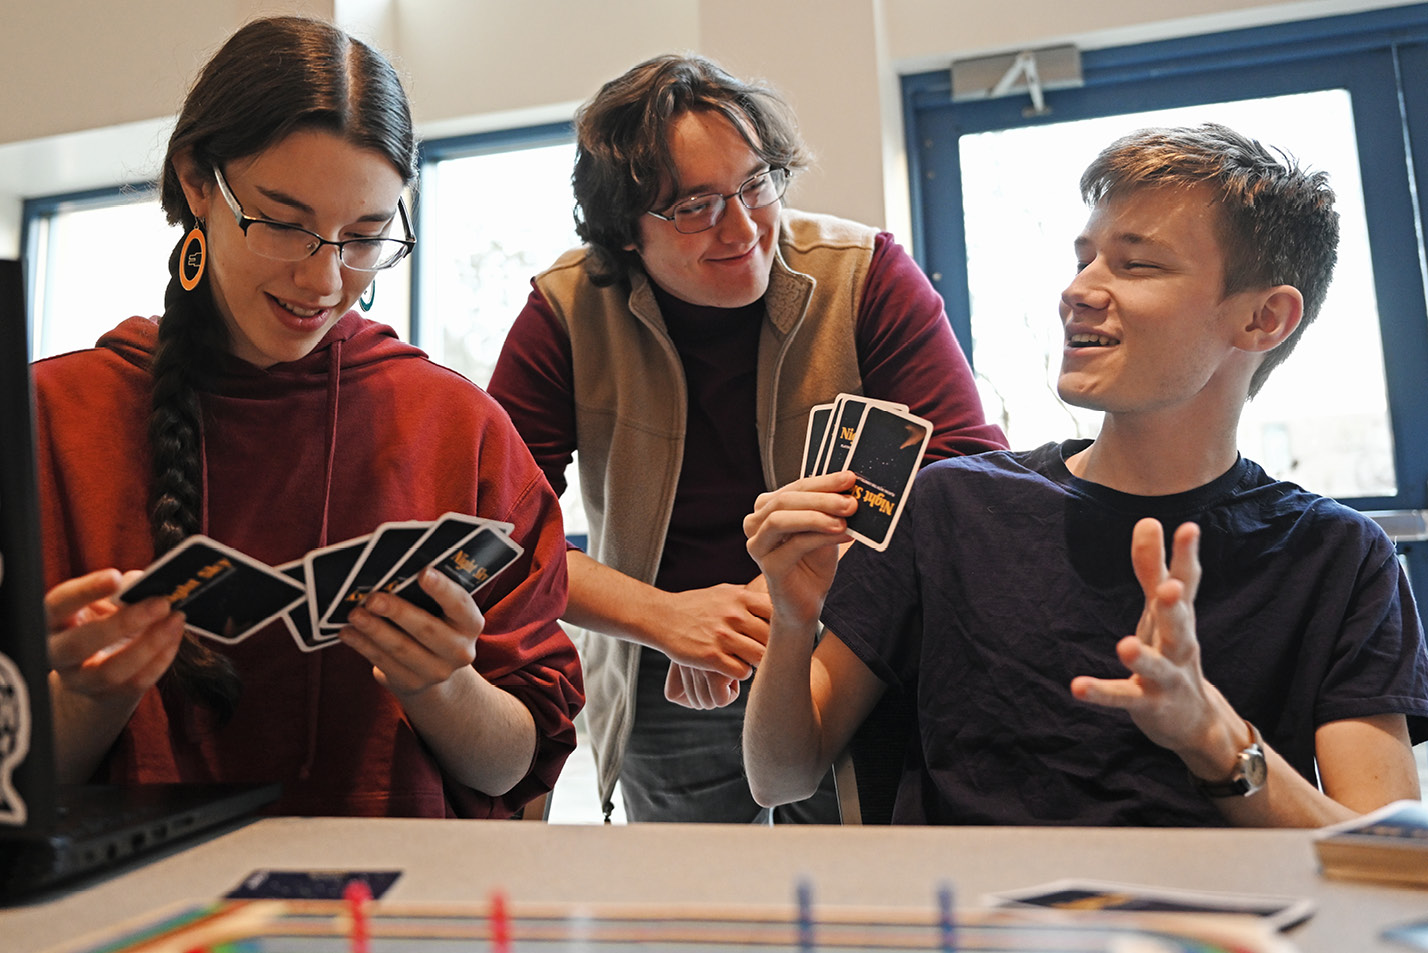 Gaming club members, from left, Beth Marsh ’24, Ian Rawlings ’25, and Alex Meyer ’25 play cribbage at their table during the Spring Student Involvement Fair.